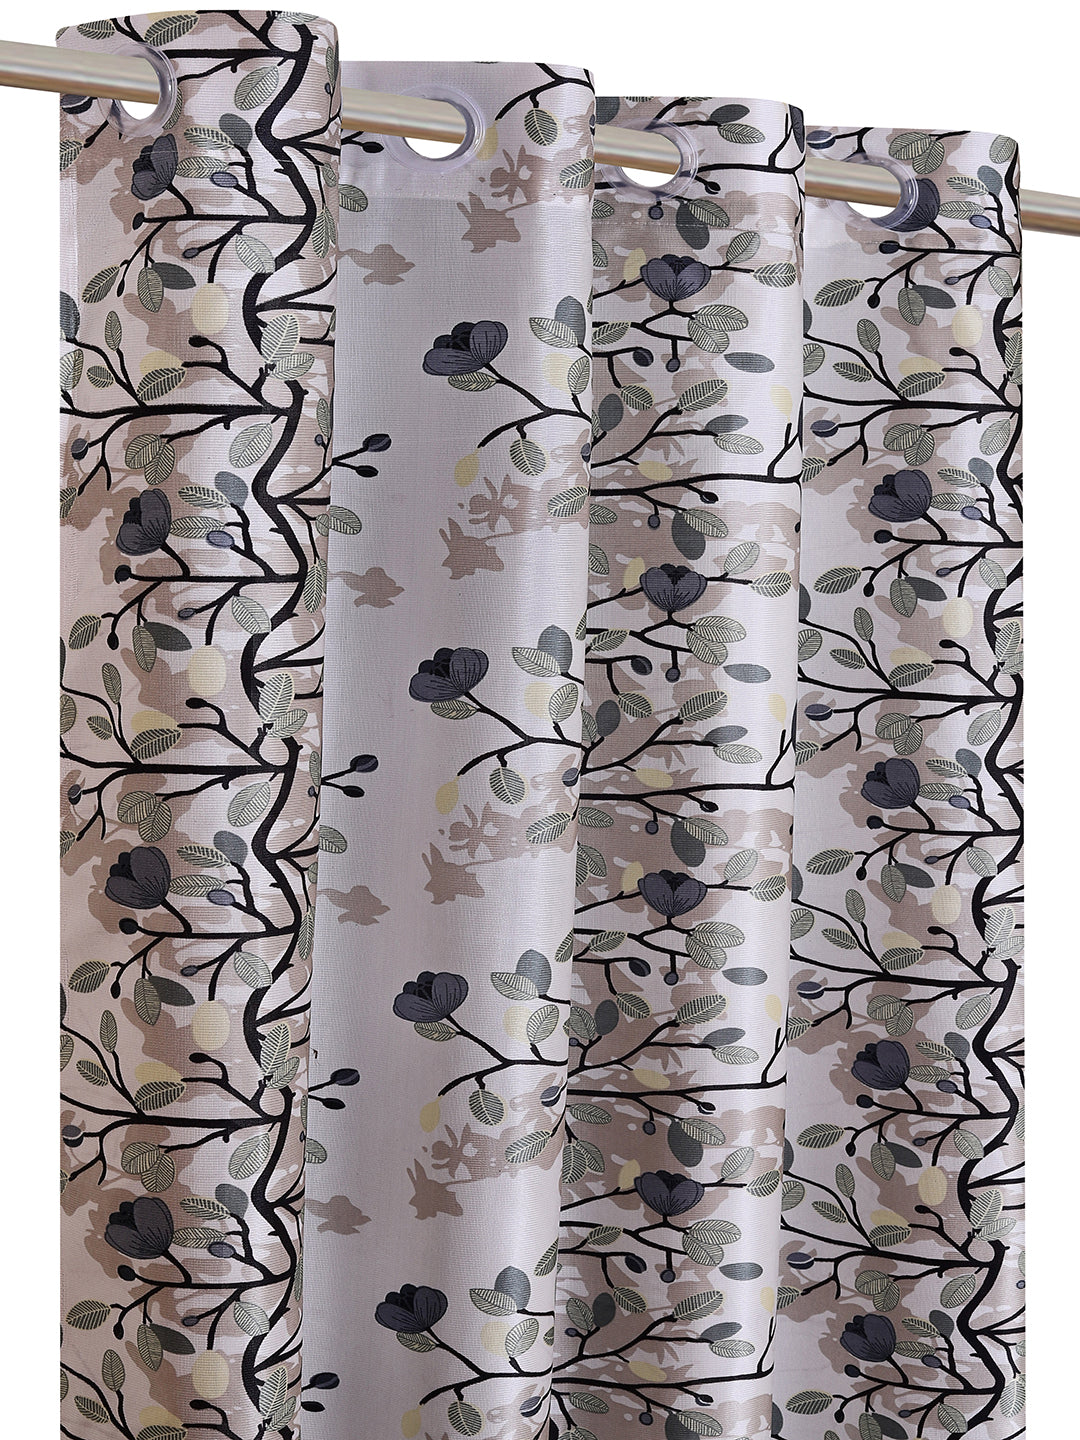 Romee Off White & Green Floral Patterned Set of 2 Long Door Curtains